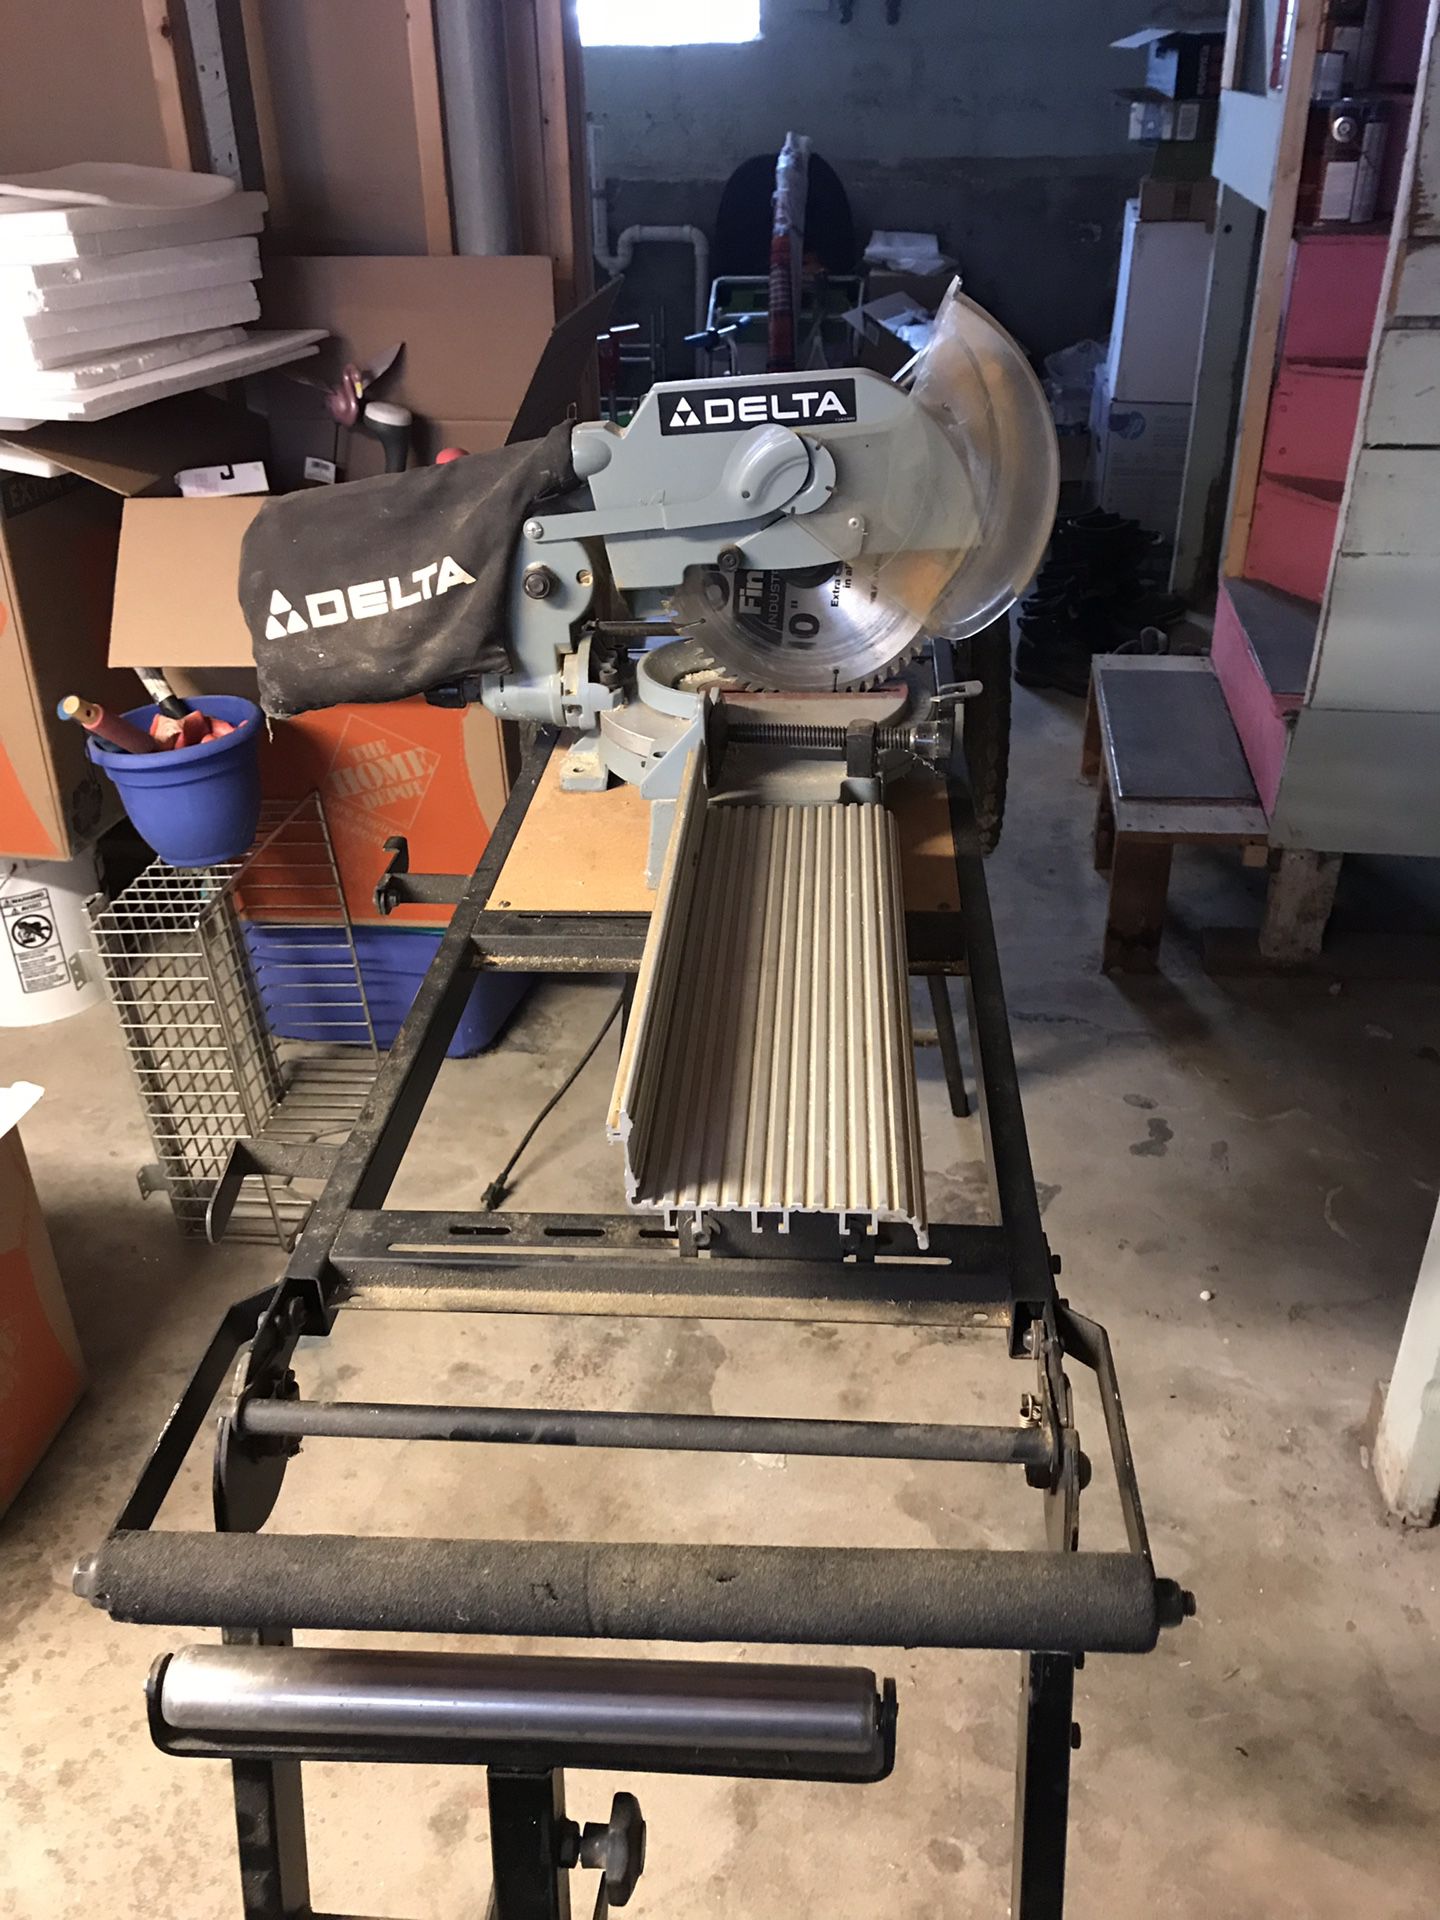 Delta chop saw and work table